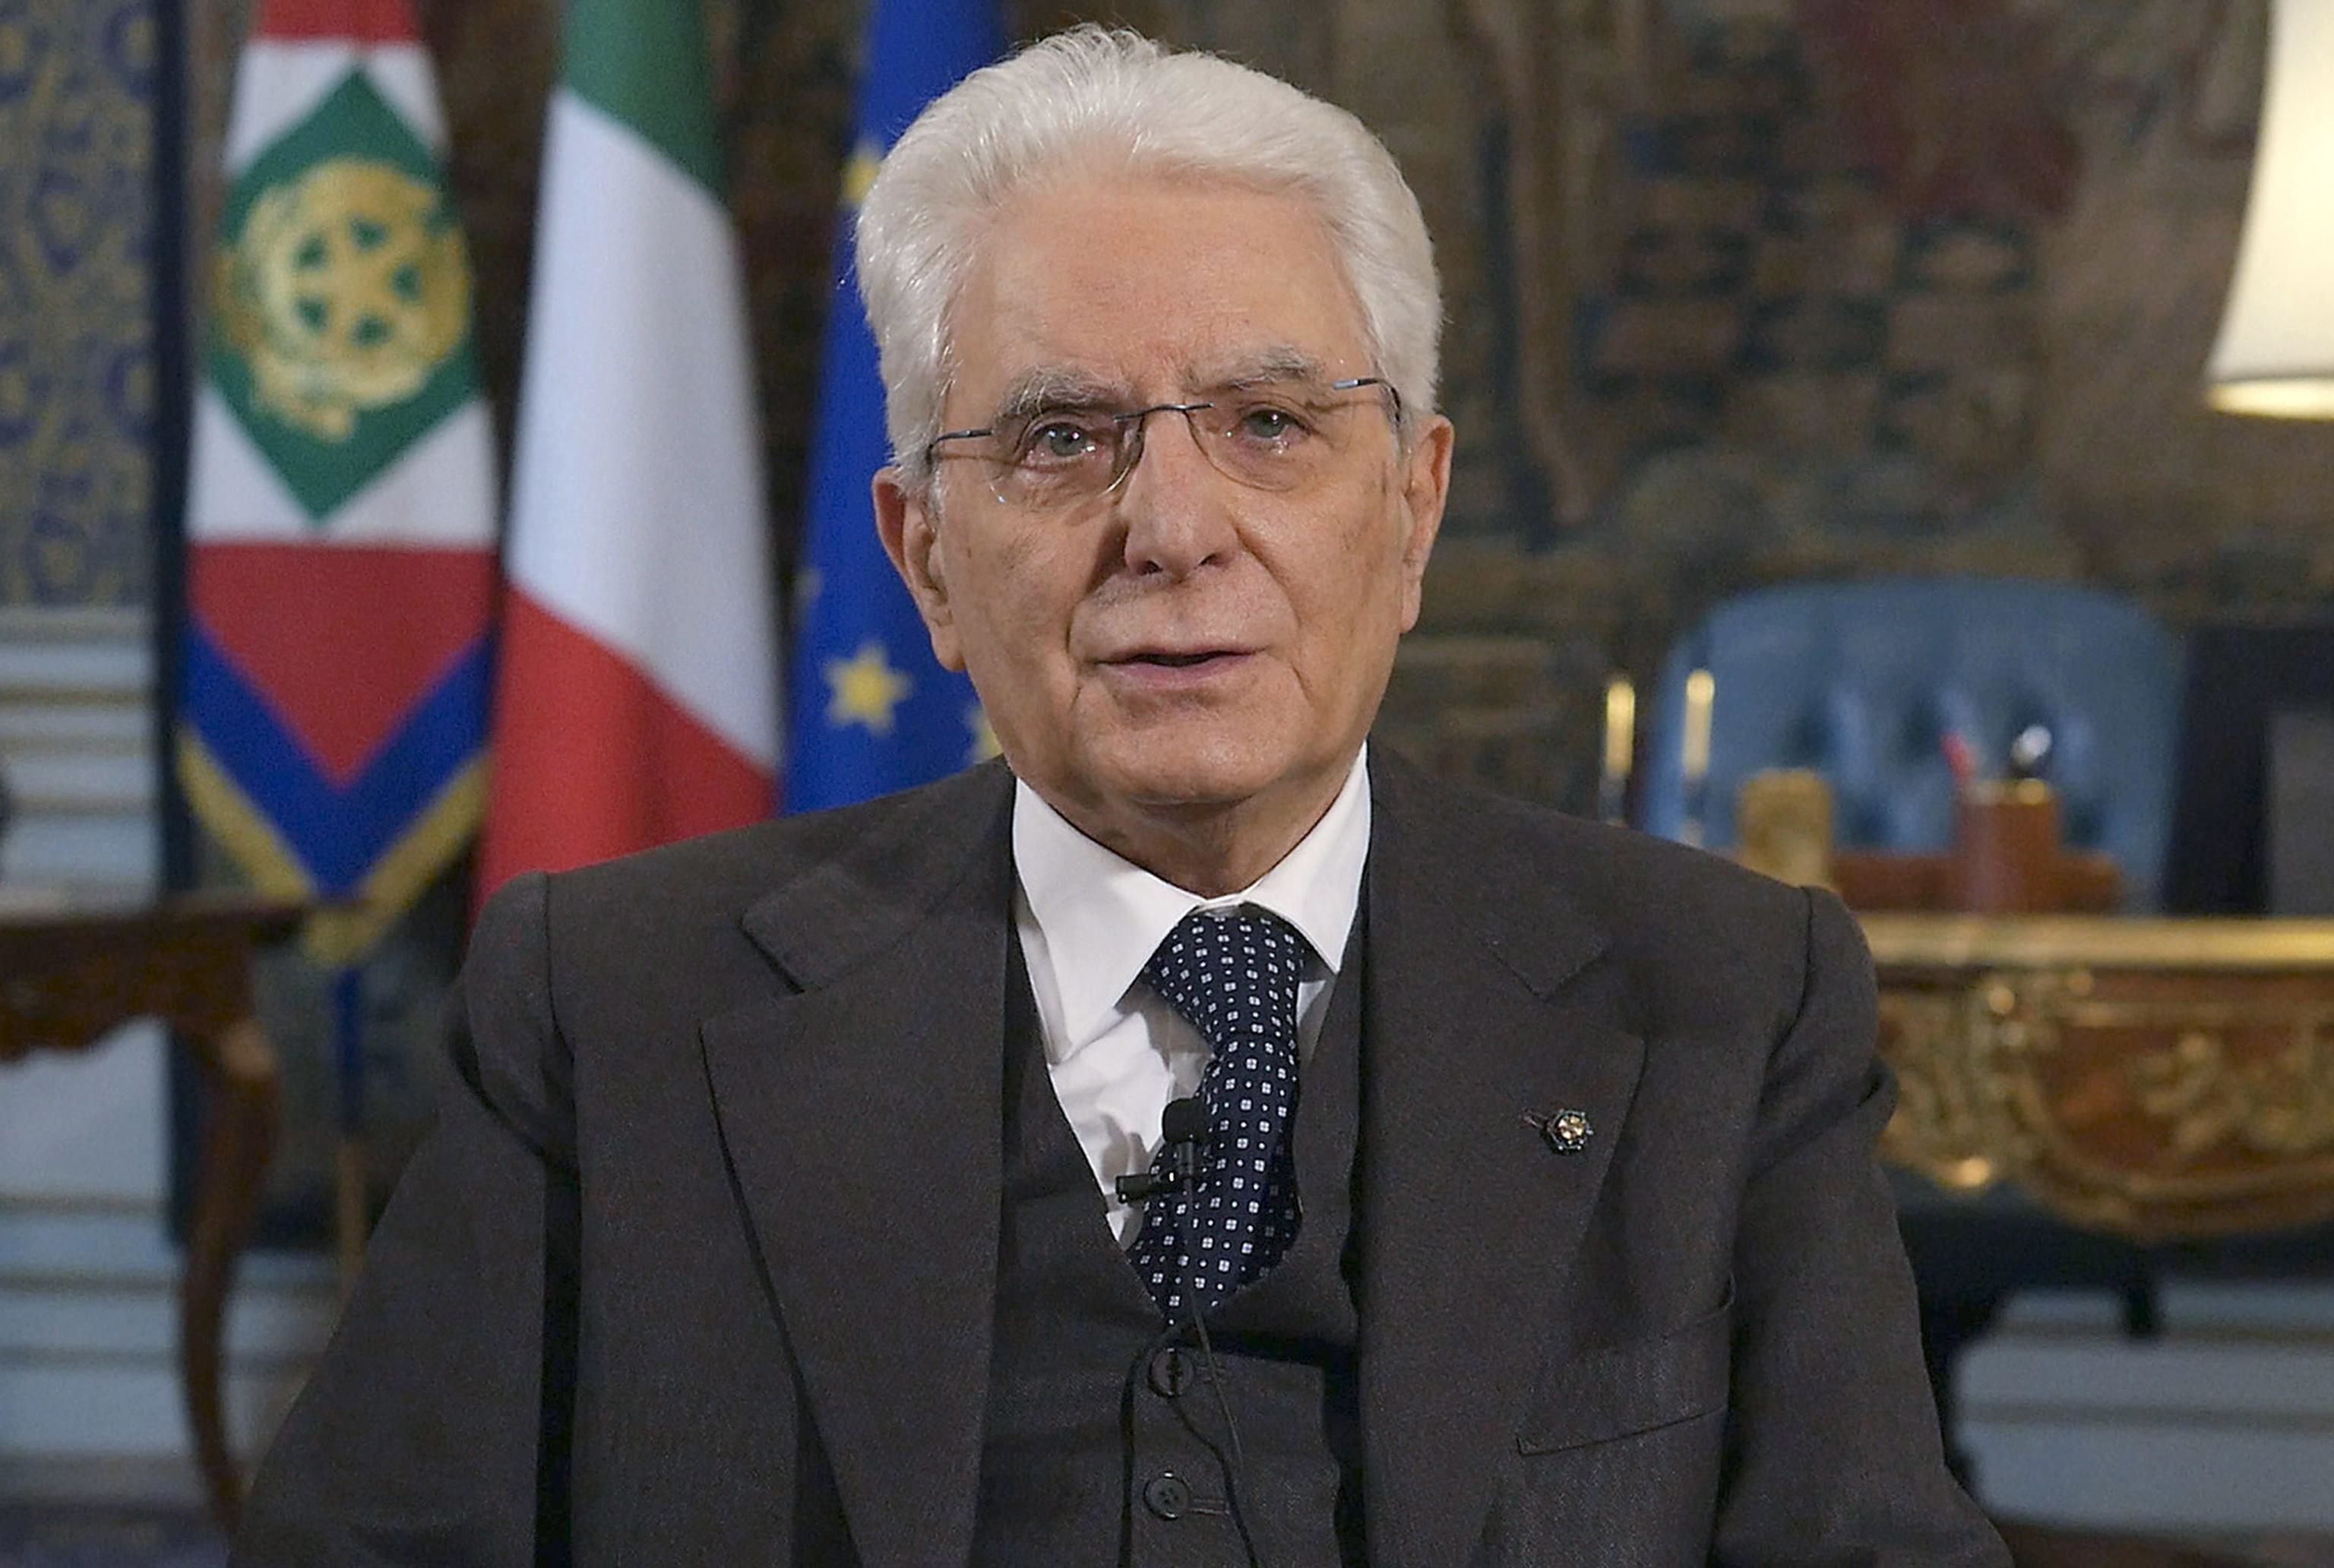 Italy’s president warns against complacency in the face of coronavirus ...